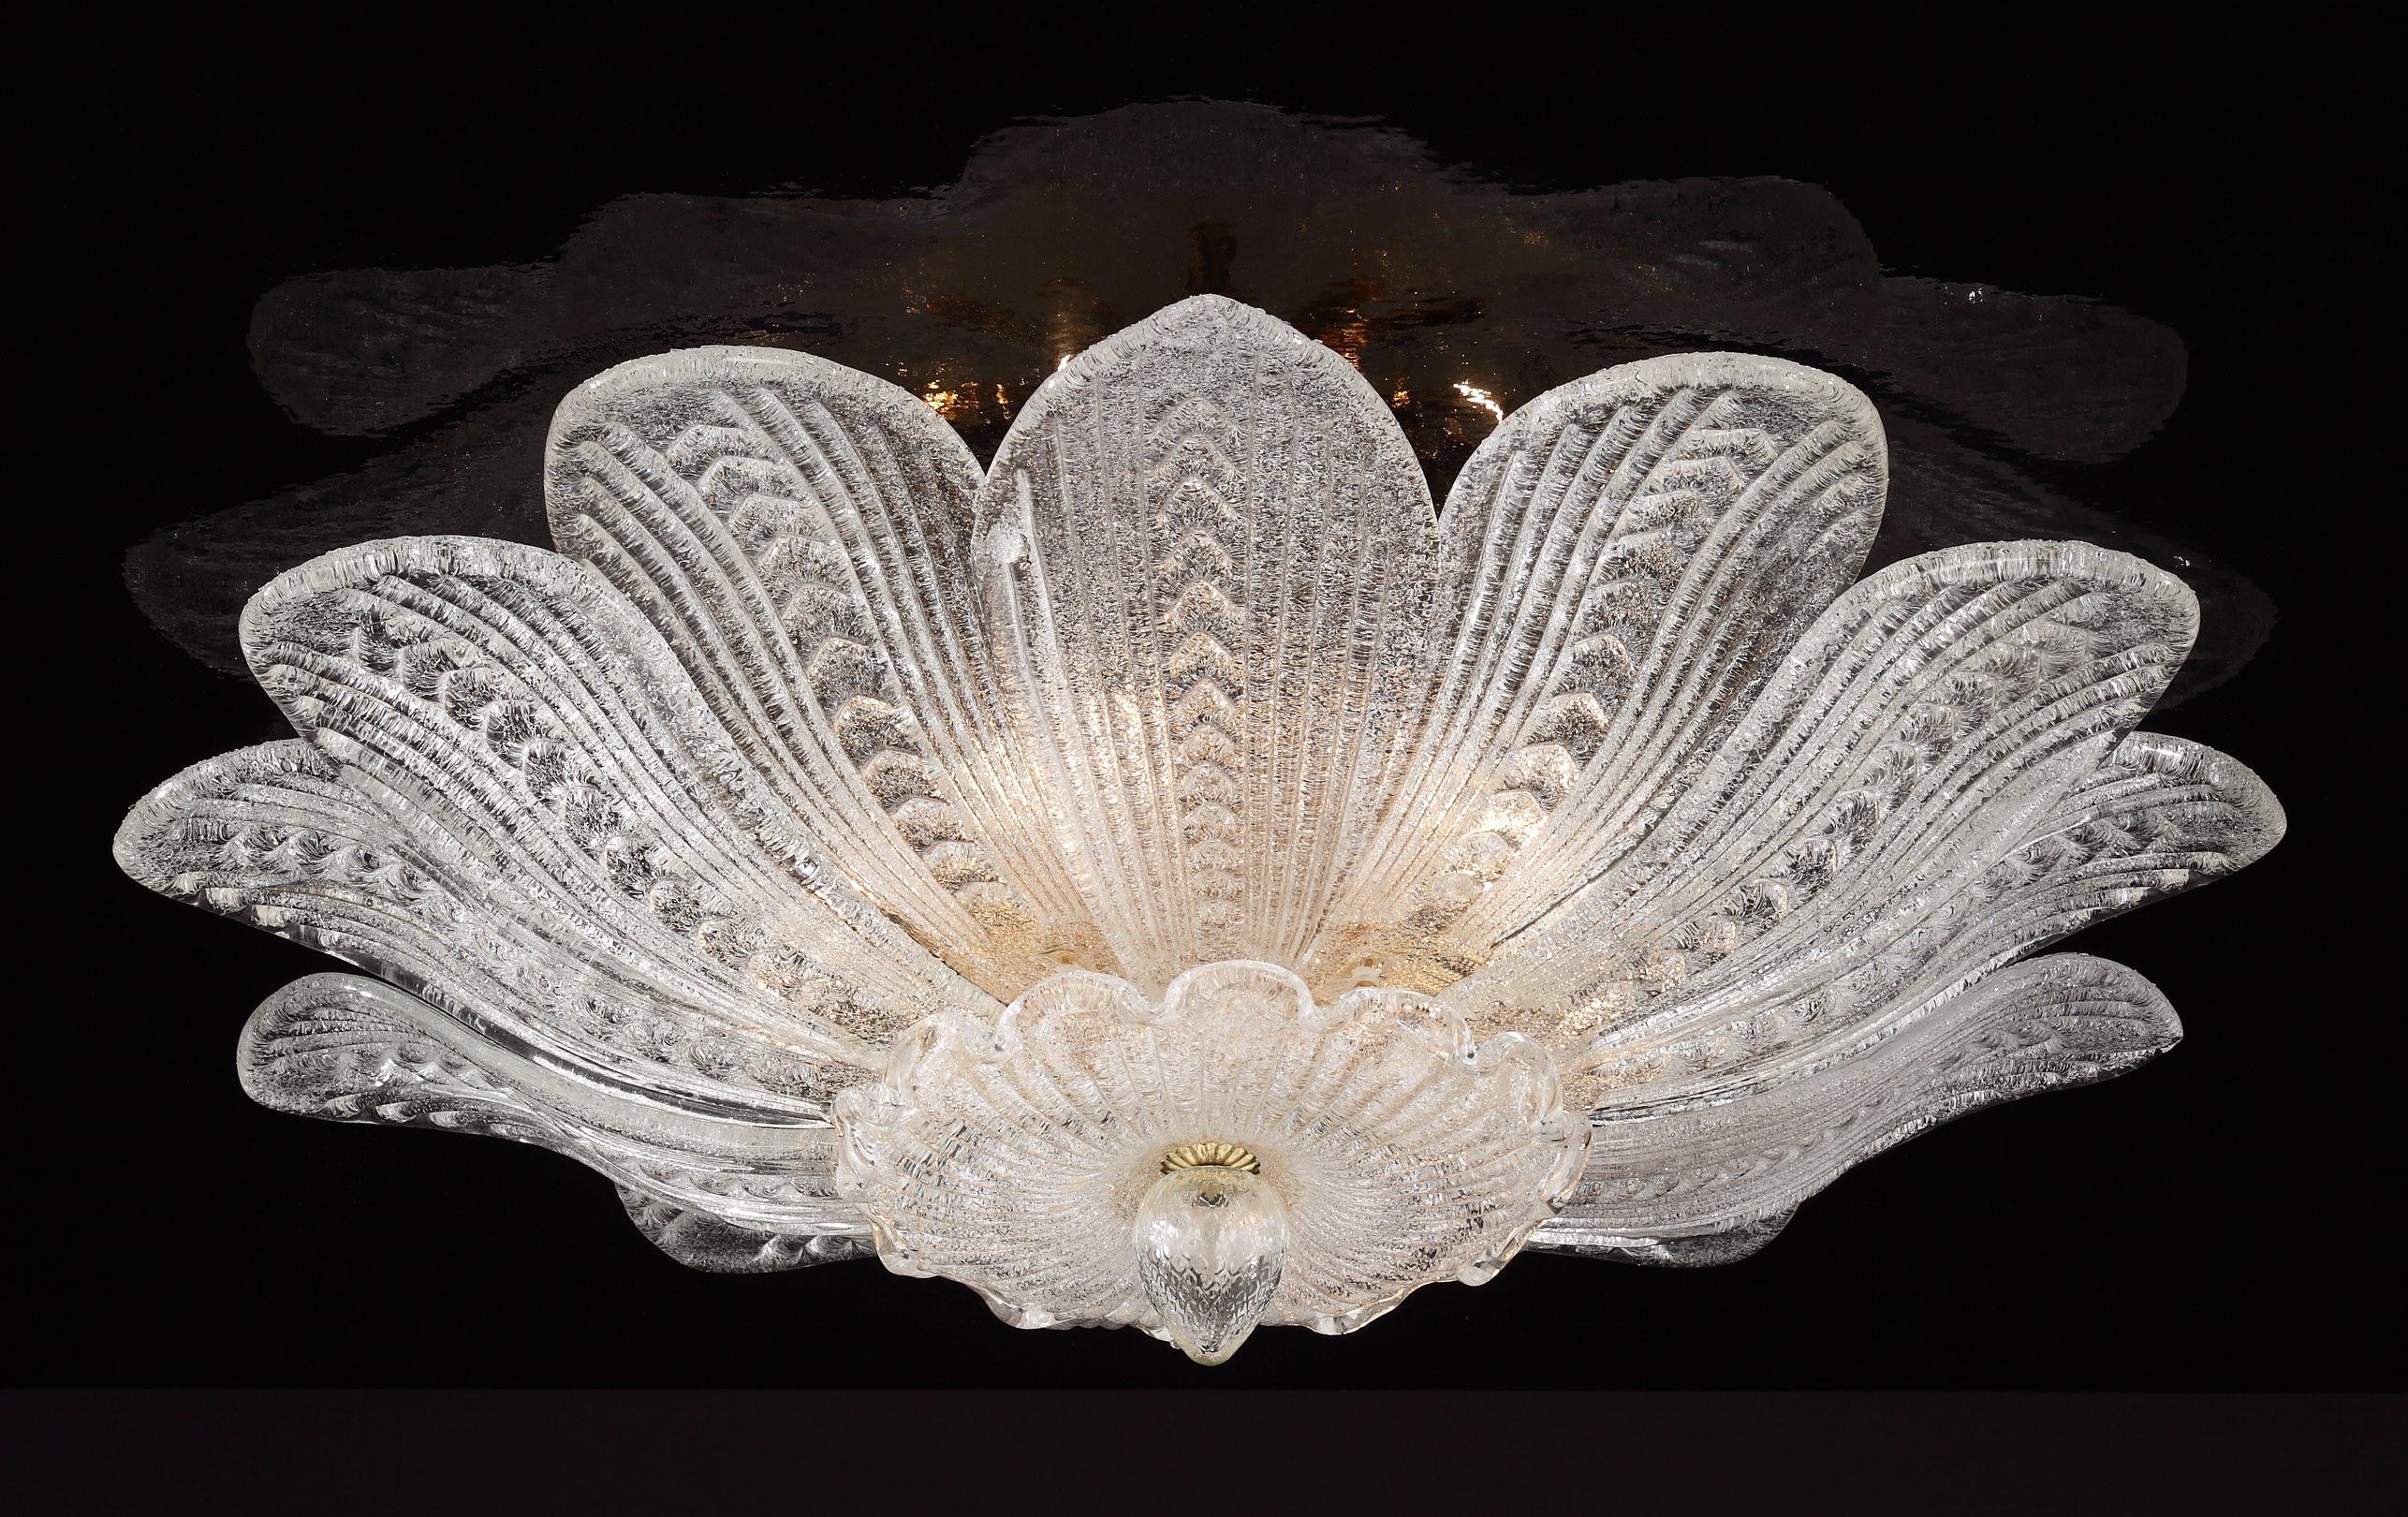 Italian flush mount with clear Murano glass leaves hand blown in Graniglia technique to produce granular textured effect, mounted on 24 K gold plated finish metal frame by Fabio Ltd / Made in Italy
3 lights / E26 or E27 type / max 60W each
Measures: